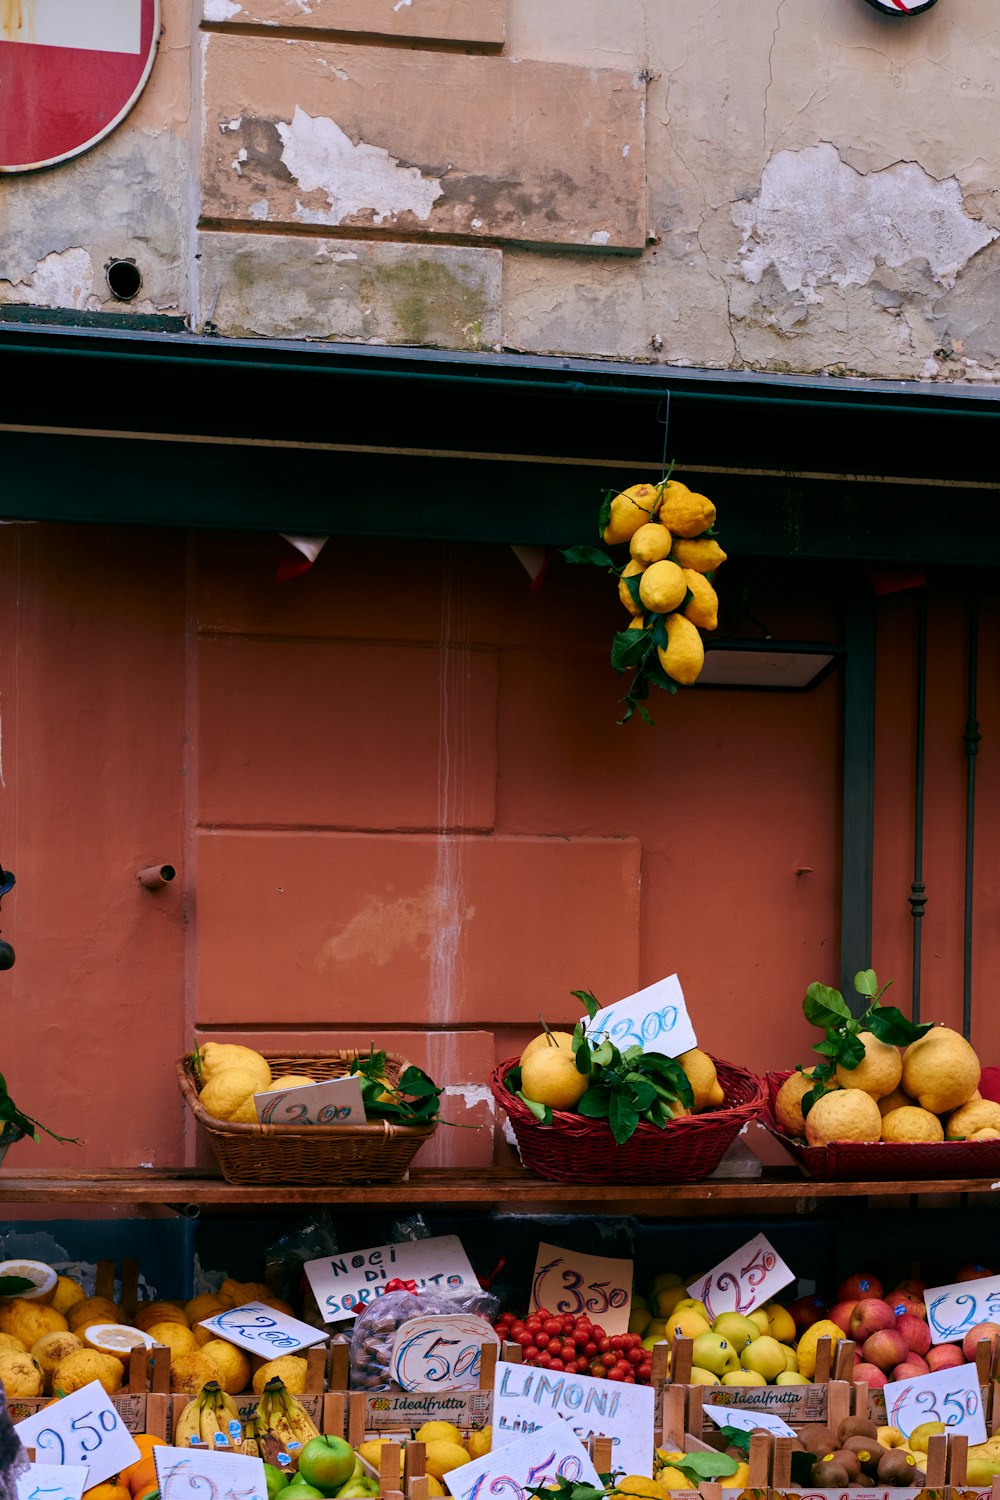 a fruit stand with fruits